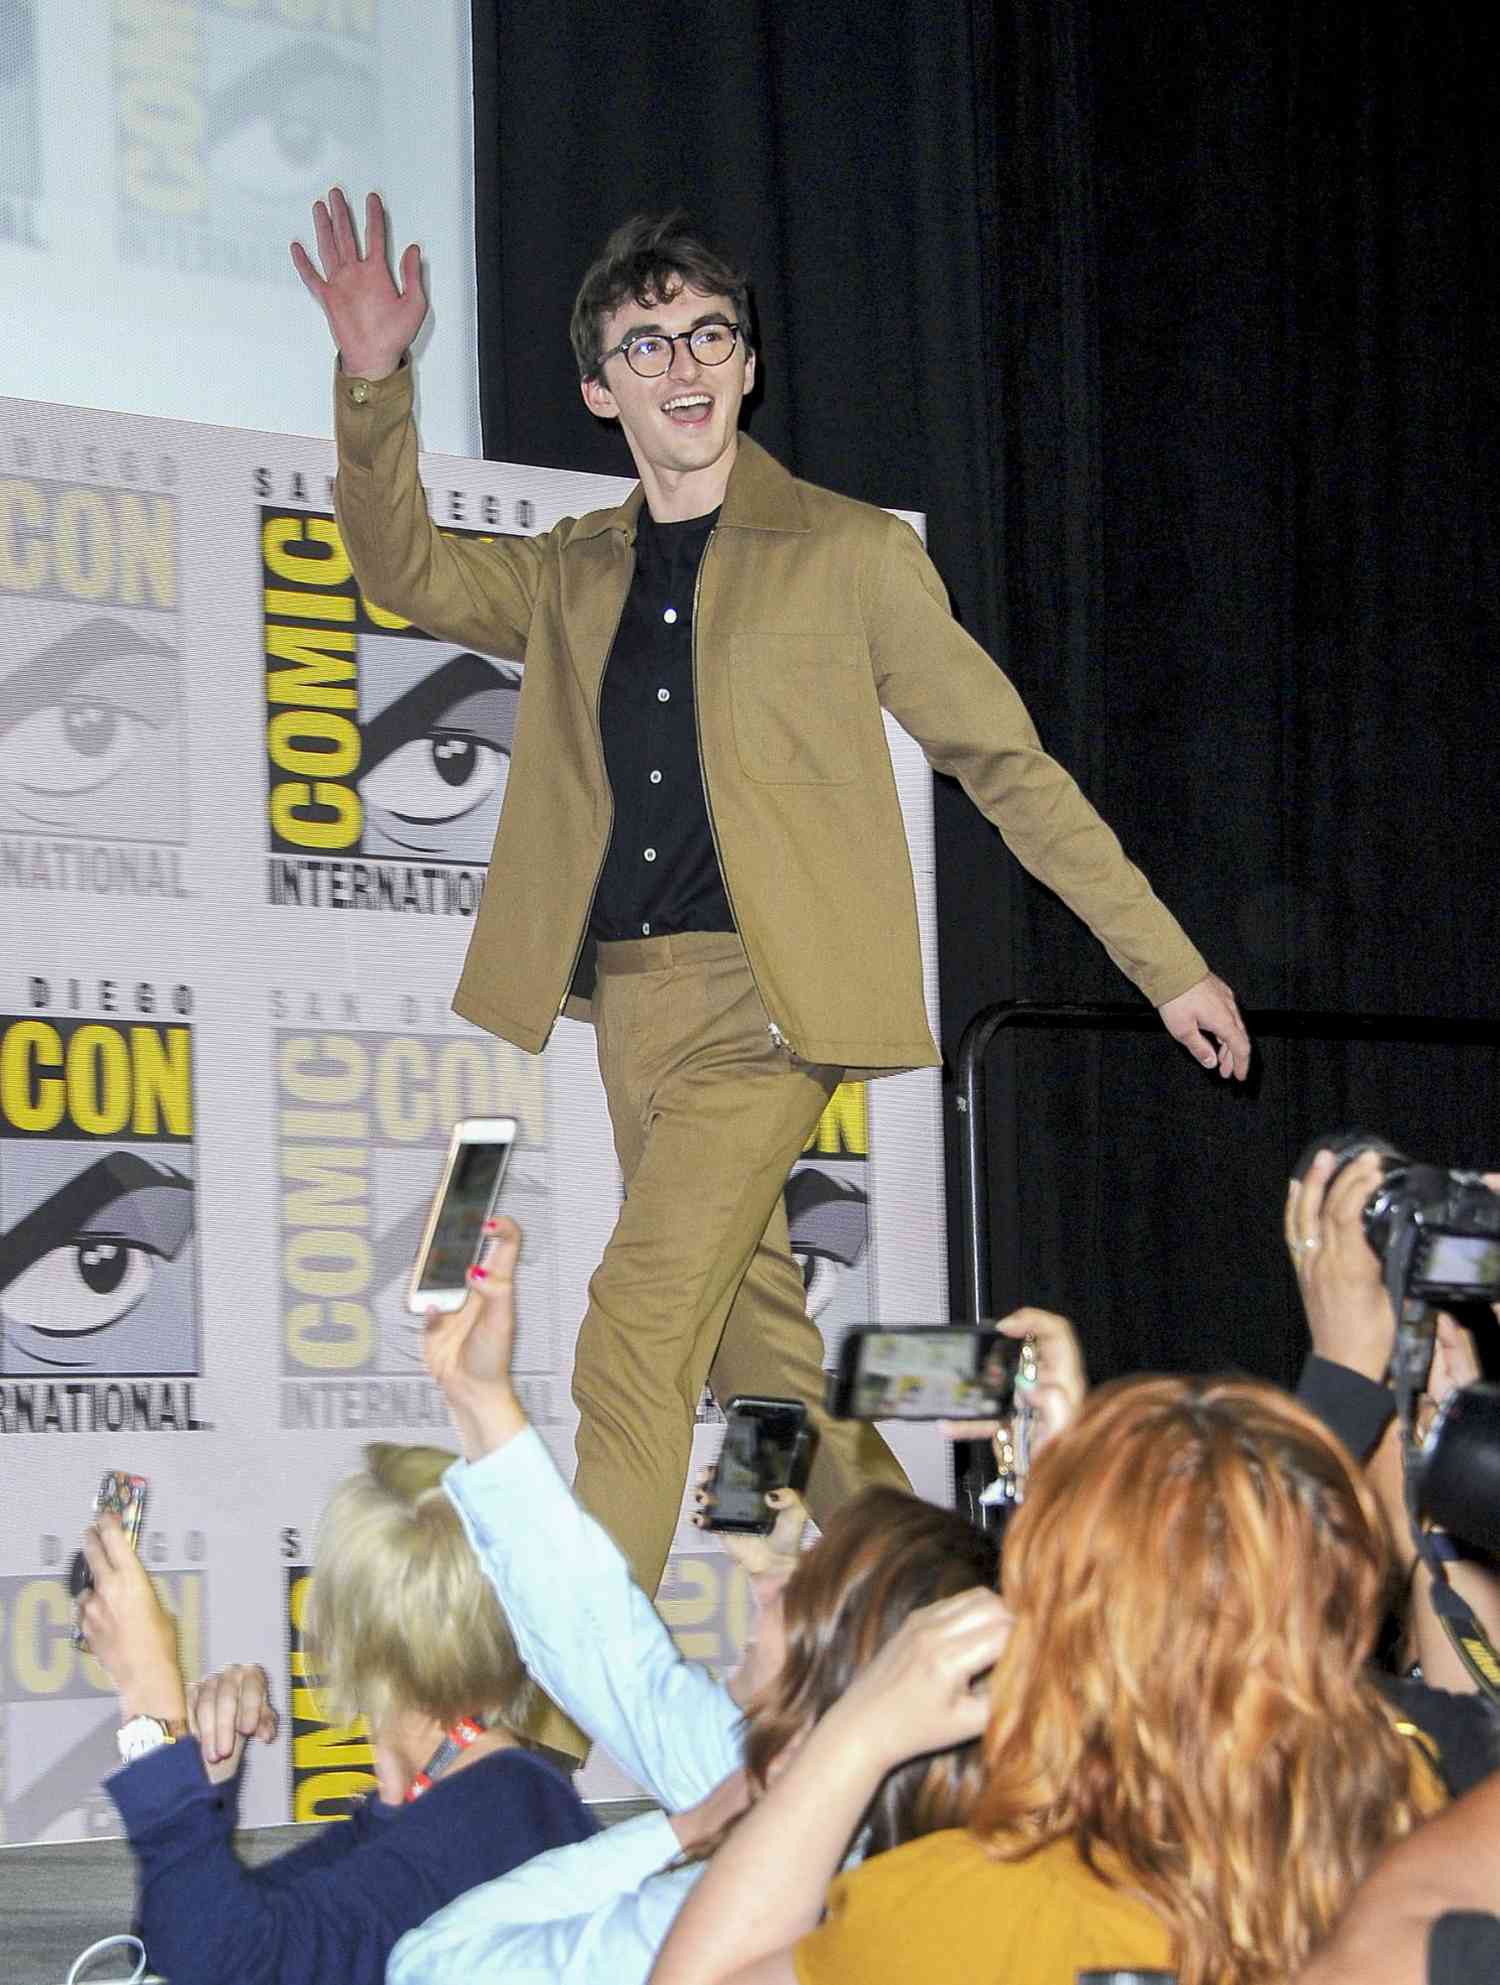 SAN DIEGO, CALIFORNIA - JULY 19: Isaac Hempstead Wright speaks at the "Game Of Thrones" Panel And Q&A during 2019 Comic-Con International at San Diego Convention Center on July 19, 2019 in San Diego, California. (Photo by Albert L. Ortega/Getty Images)